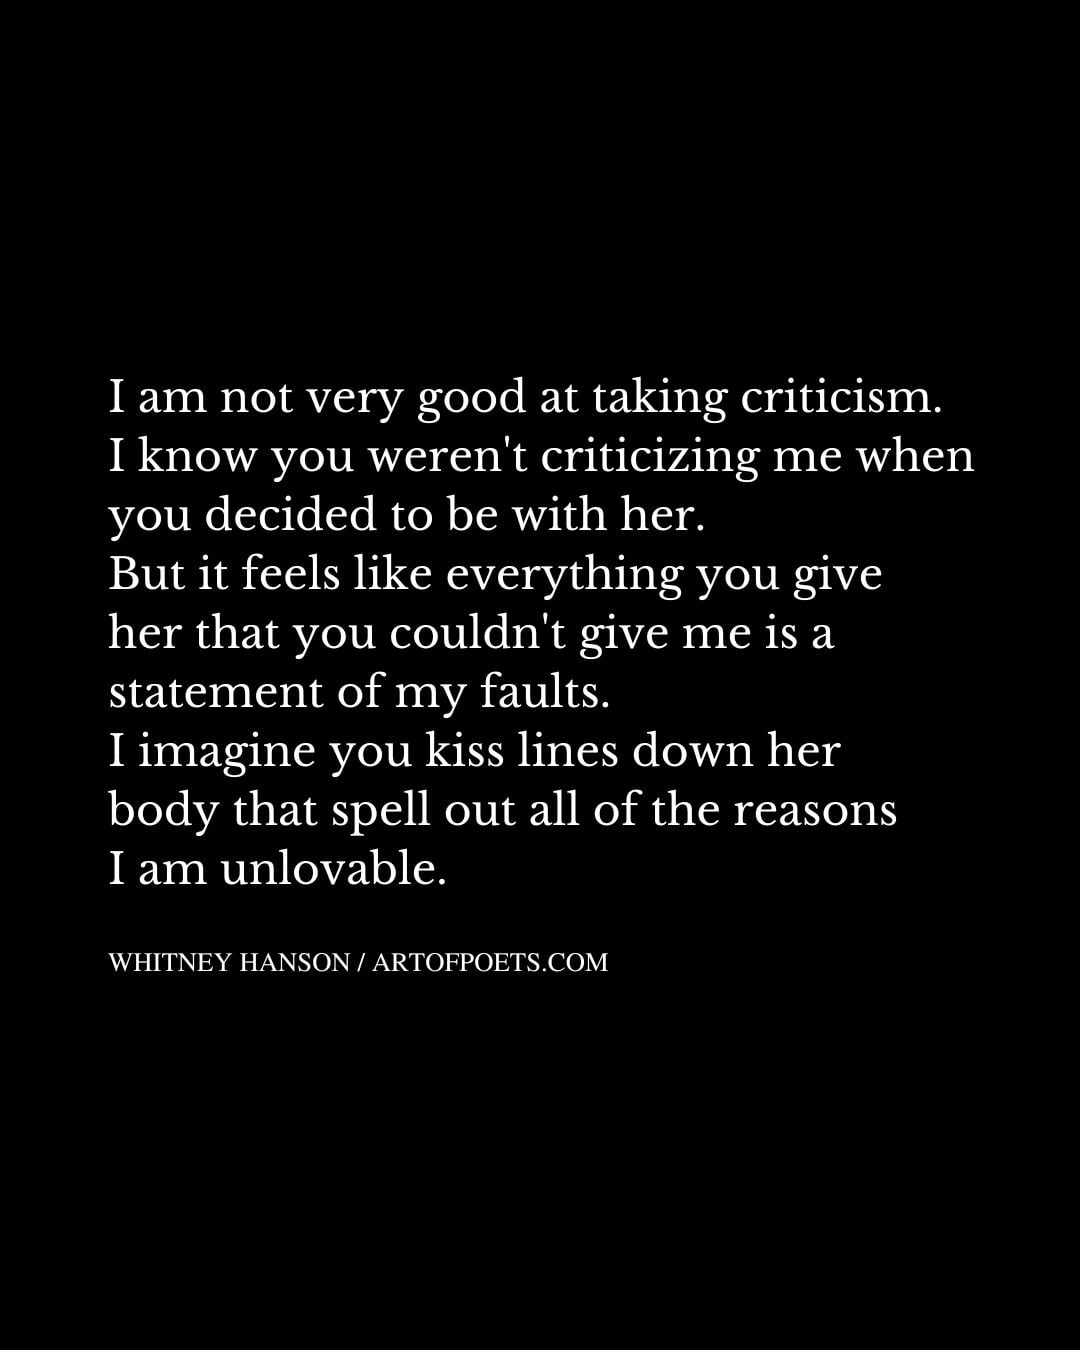 am not very good at taking criticism. I know you werent criticizing me when you decided to be with her